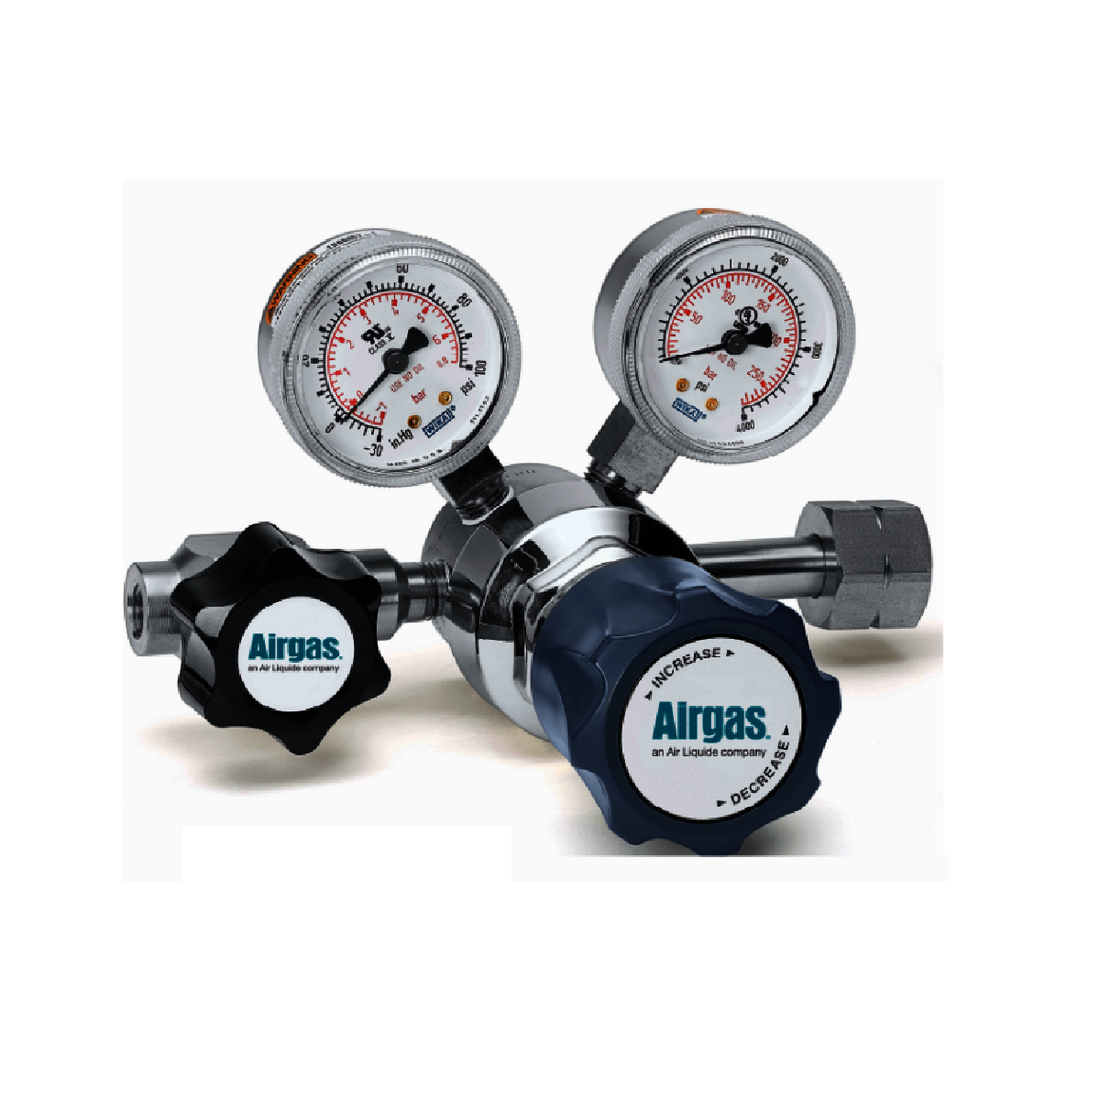 Airgas Model 223D580 Stainless Steel Corrosive Gas Single Stage Regulator With CGA-580 Connection